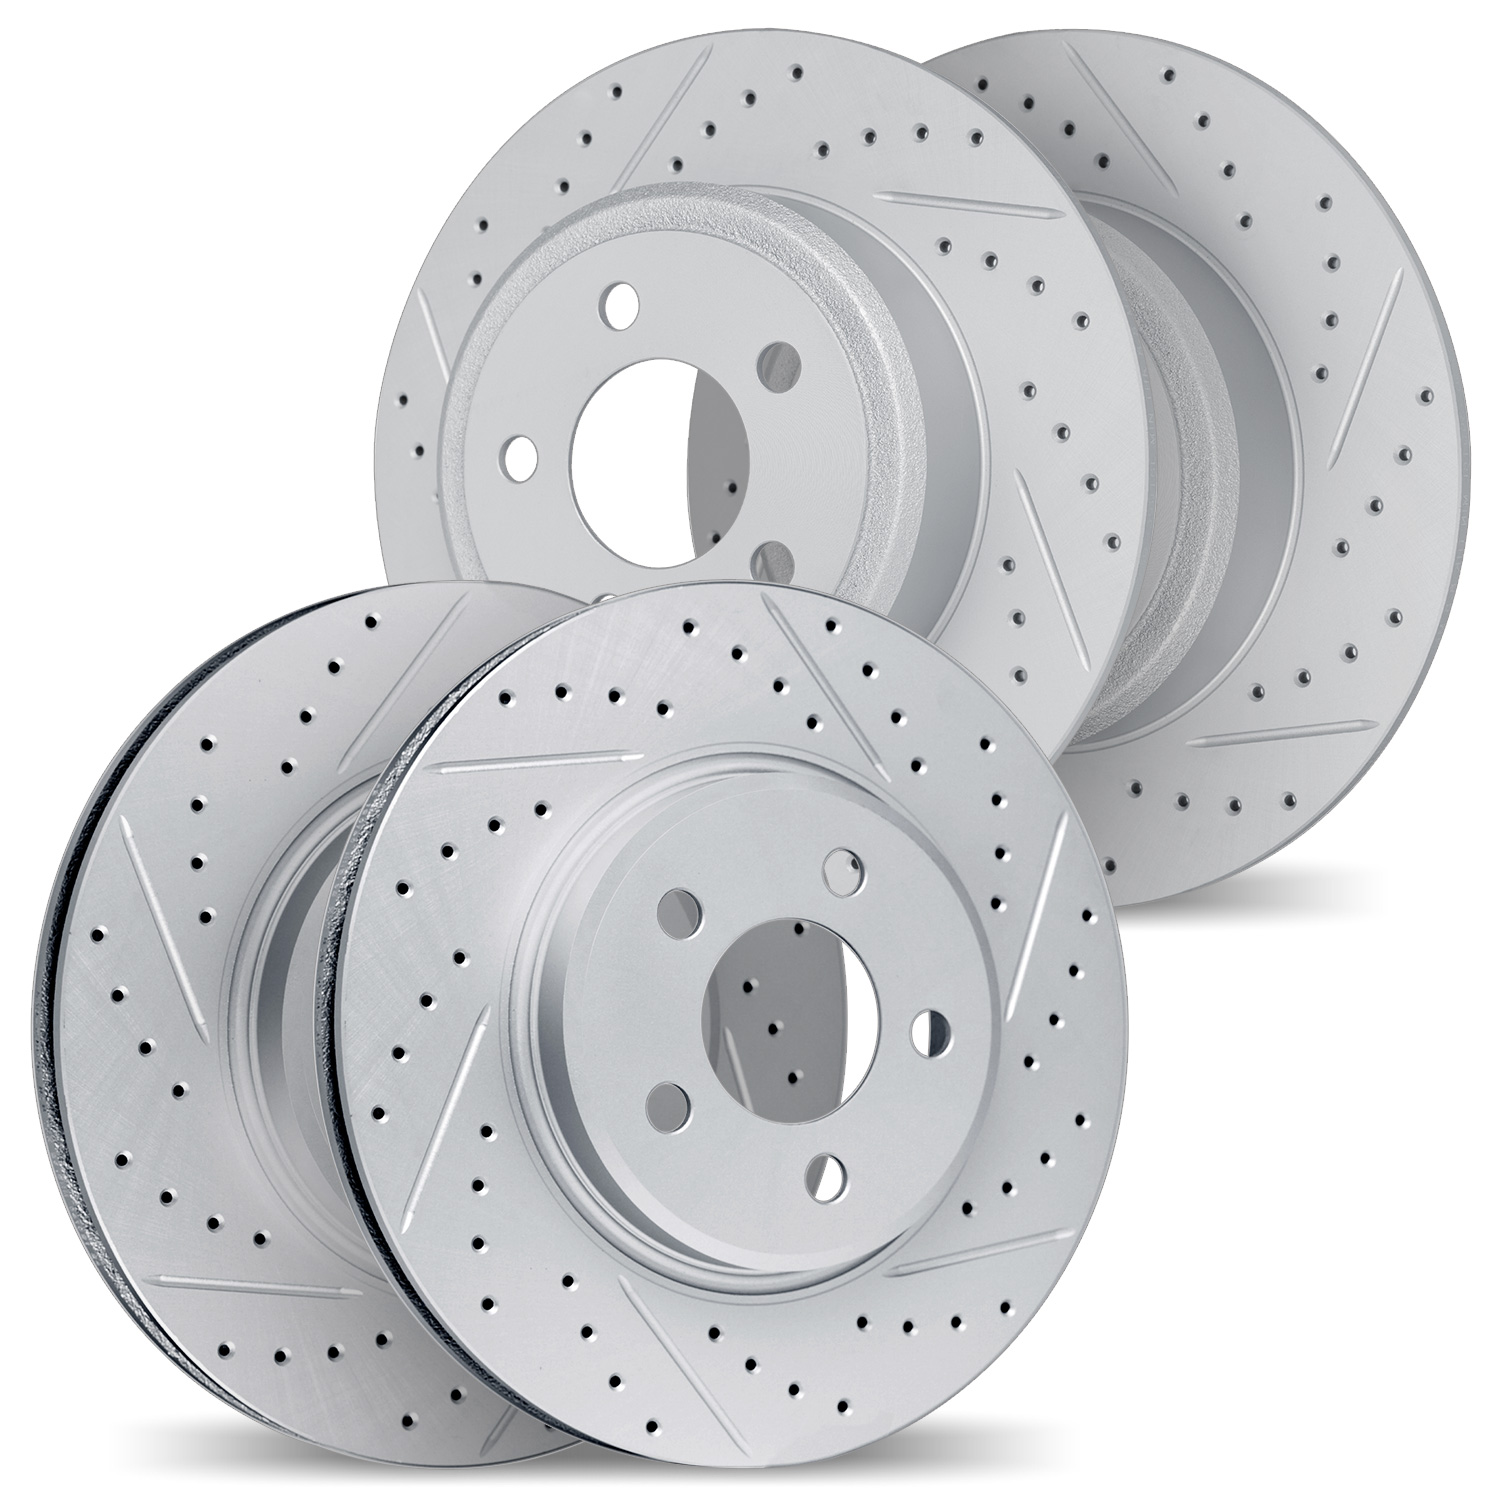 2004-03031 Geoperformance Drilled/Slotted Brake Rotors, Fits Select Kia/Hyundai/Genesis, Position: Front and Rear